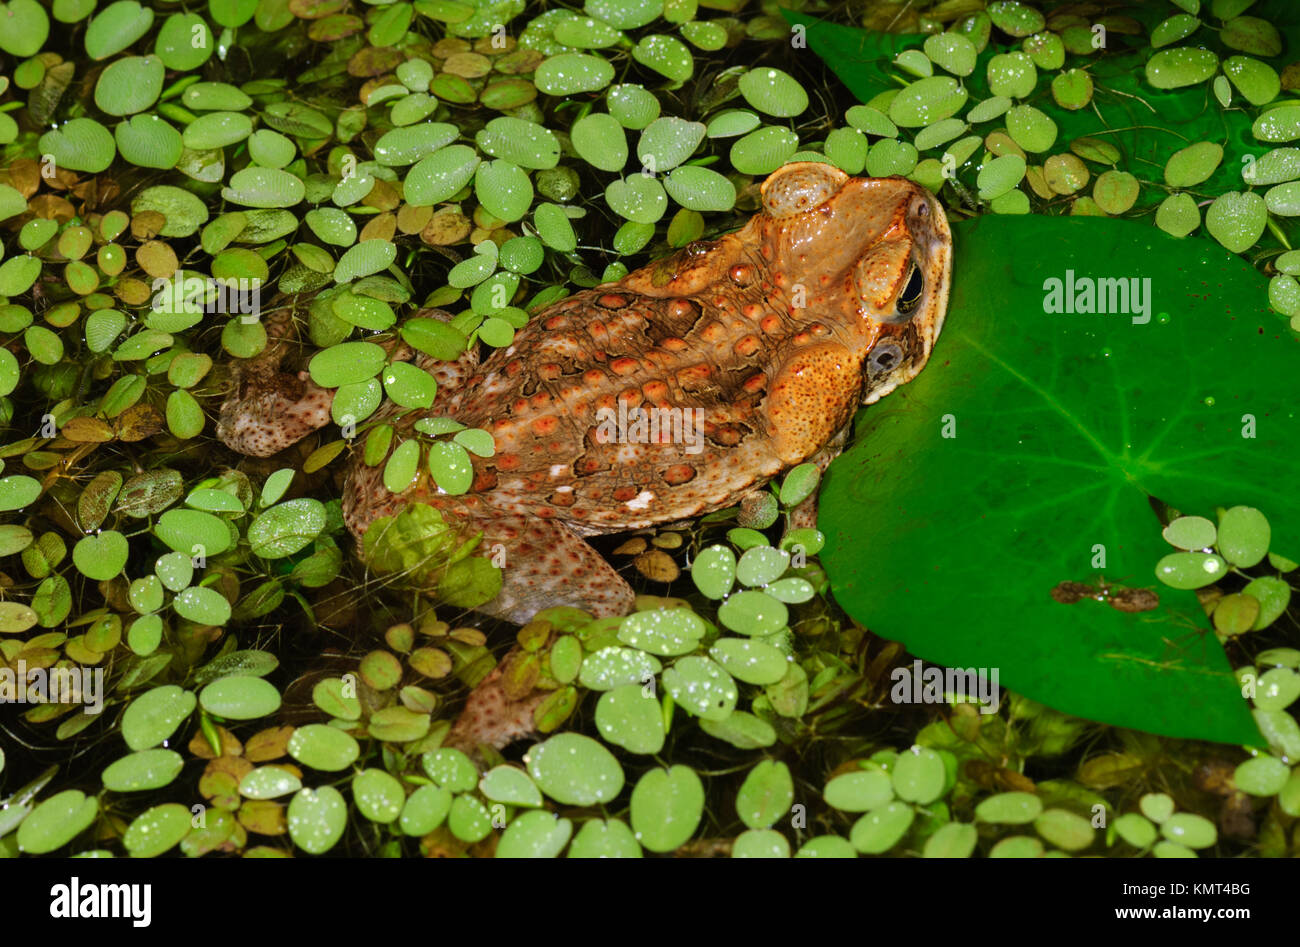 Cane Toad (Bufo Marinus or Rhinella marina) is a pest introduced species in Australia Stock Photo